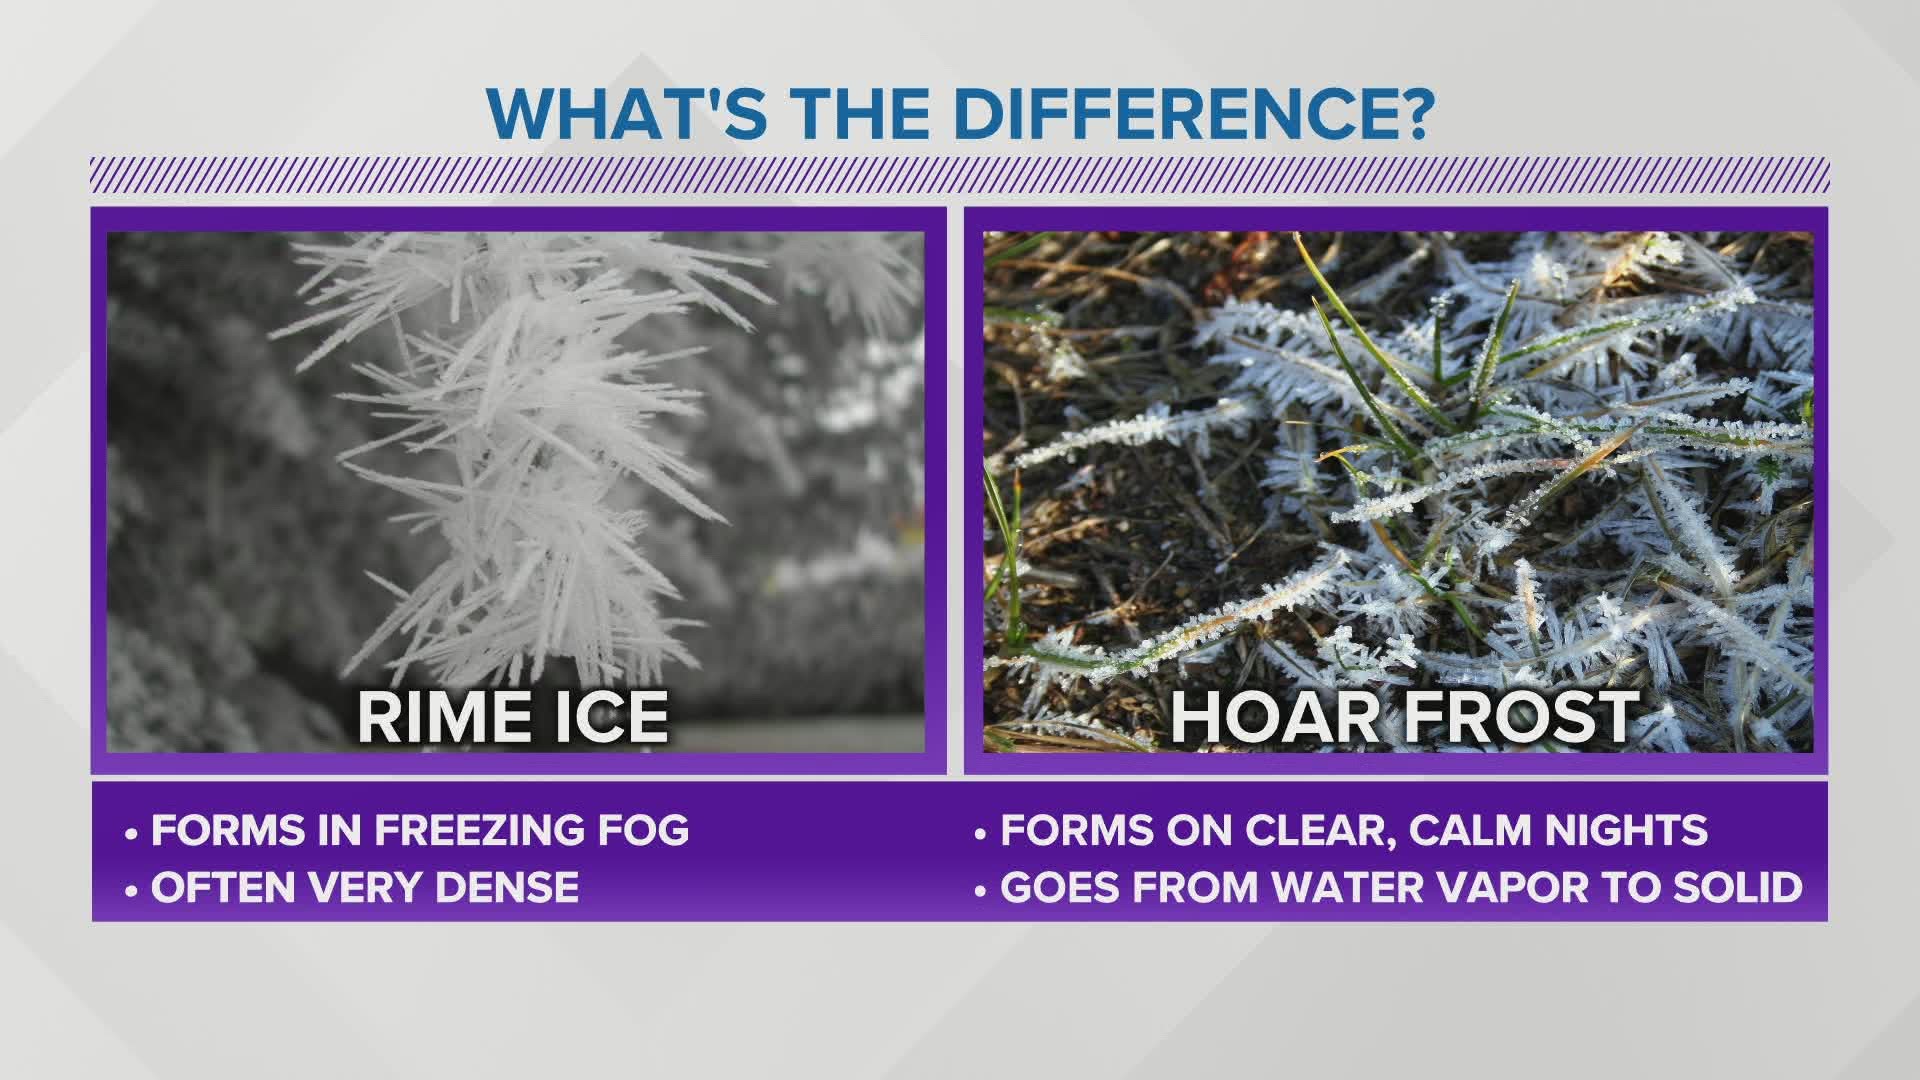 Hoar frost and rime ice are common in the winter months, especially when overnight and early morning temperatures fall below 32 degrees